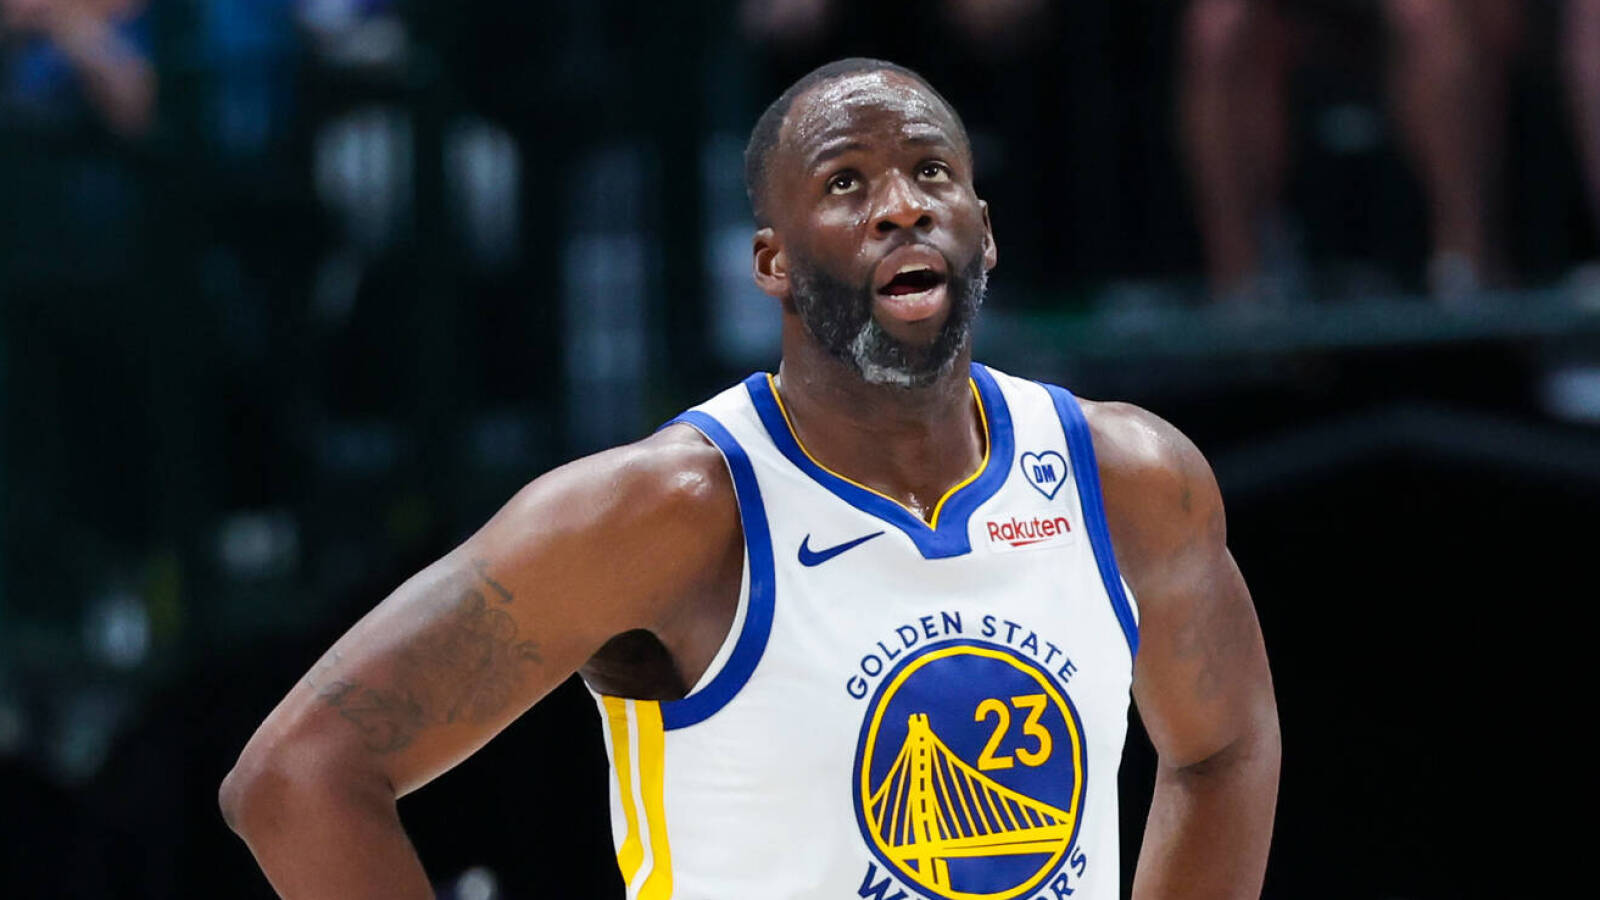 'Ain't good enough': Draymond Green claims Celtics must 'win it all' or it's a 'failure'